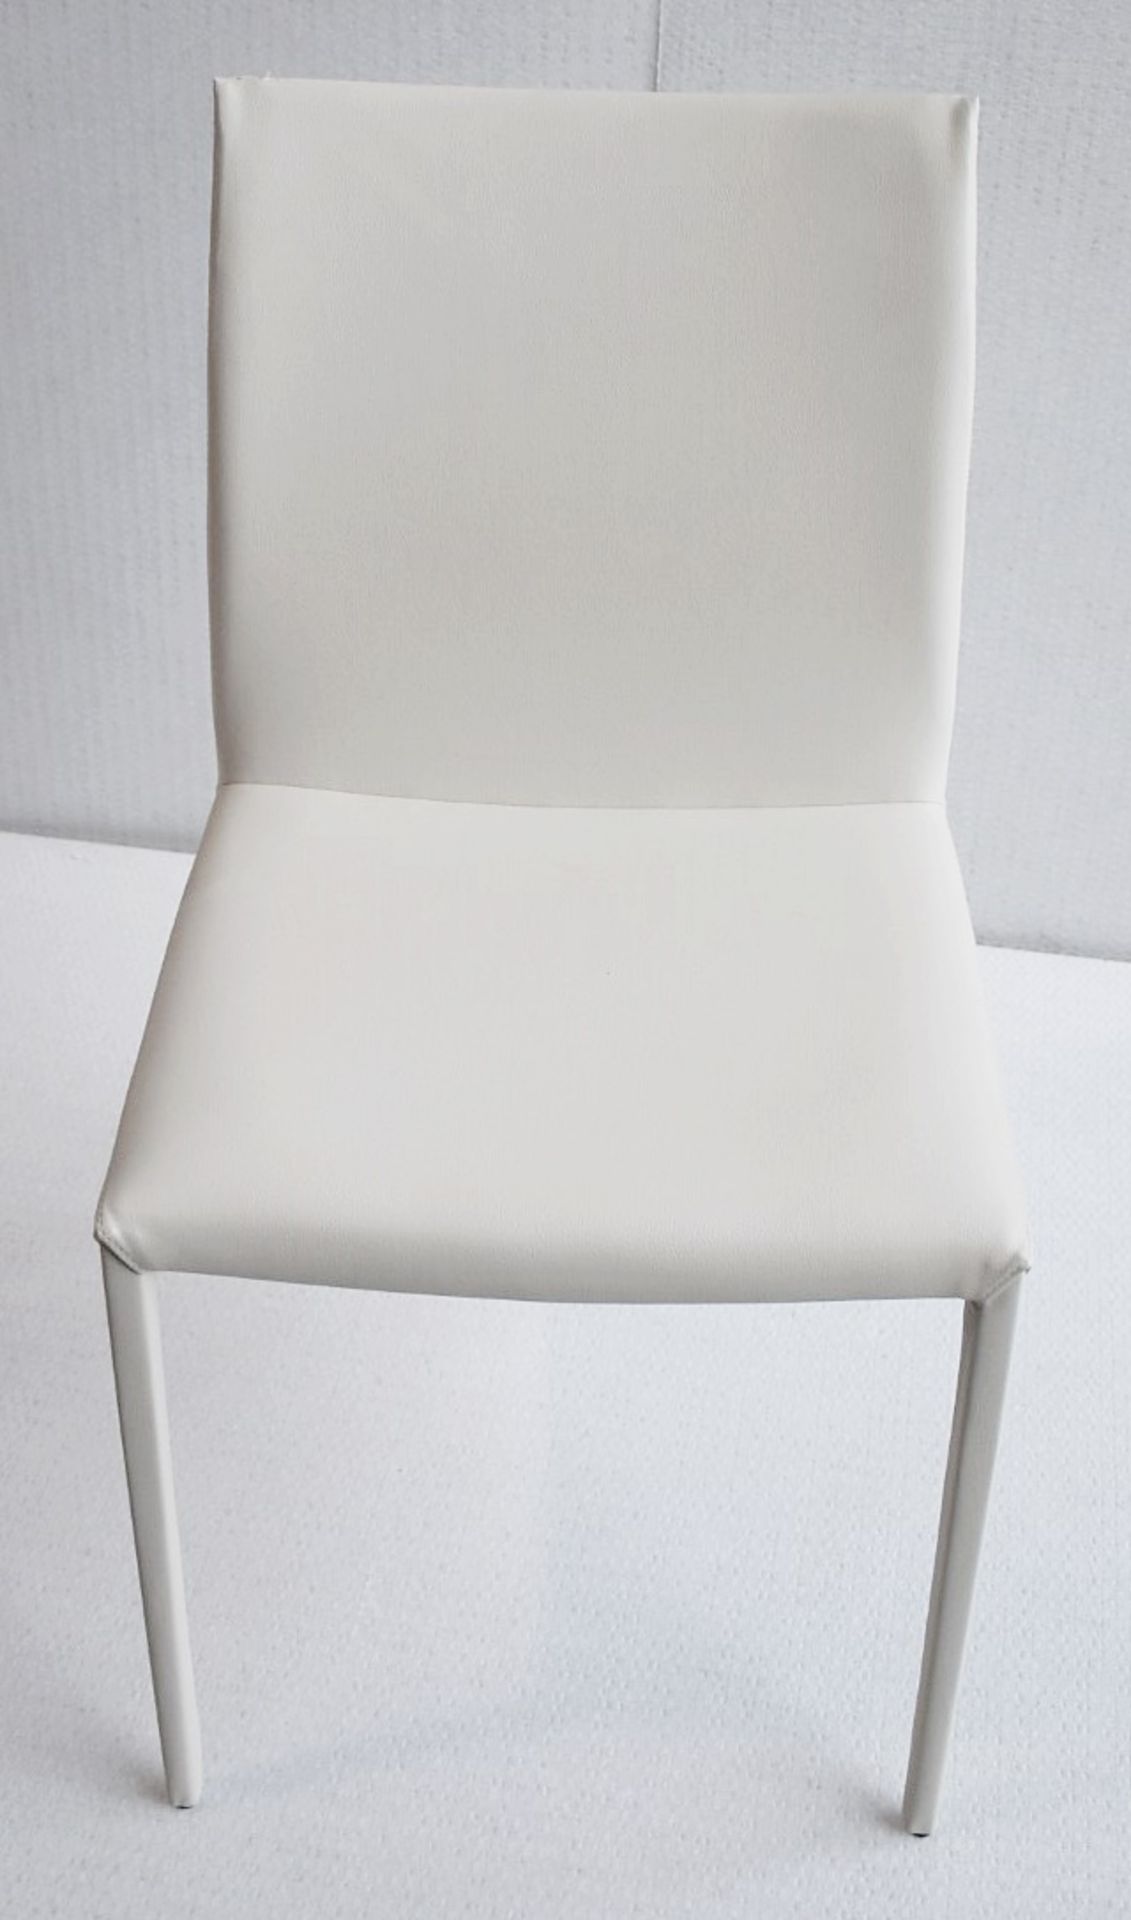 1 x CATTELAN ITALIA 'Norma' Designer Fully Upholstered Chair in a Pale Premium Leather - Image 7 of 9